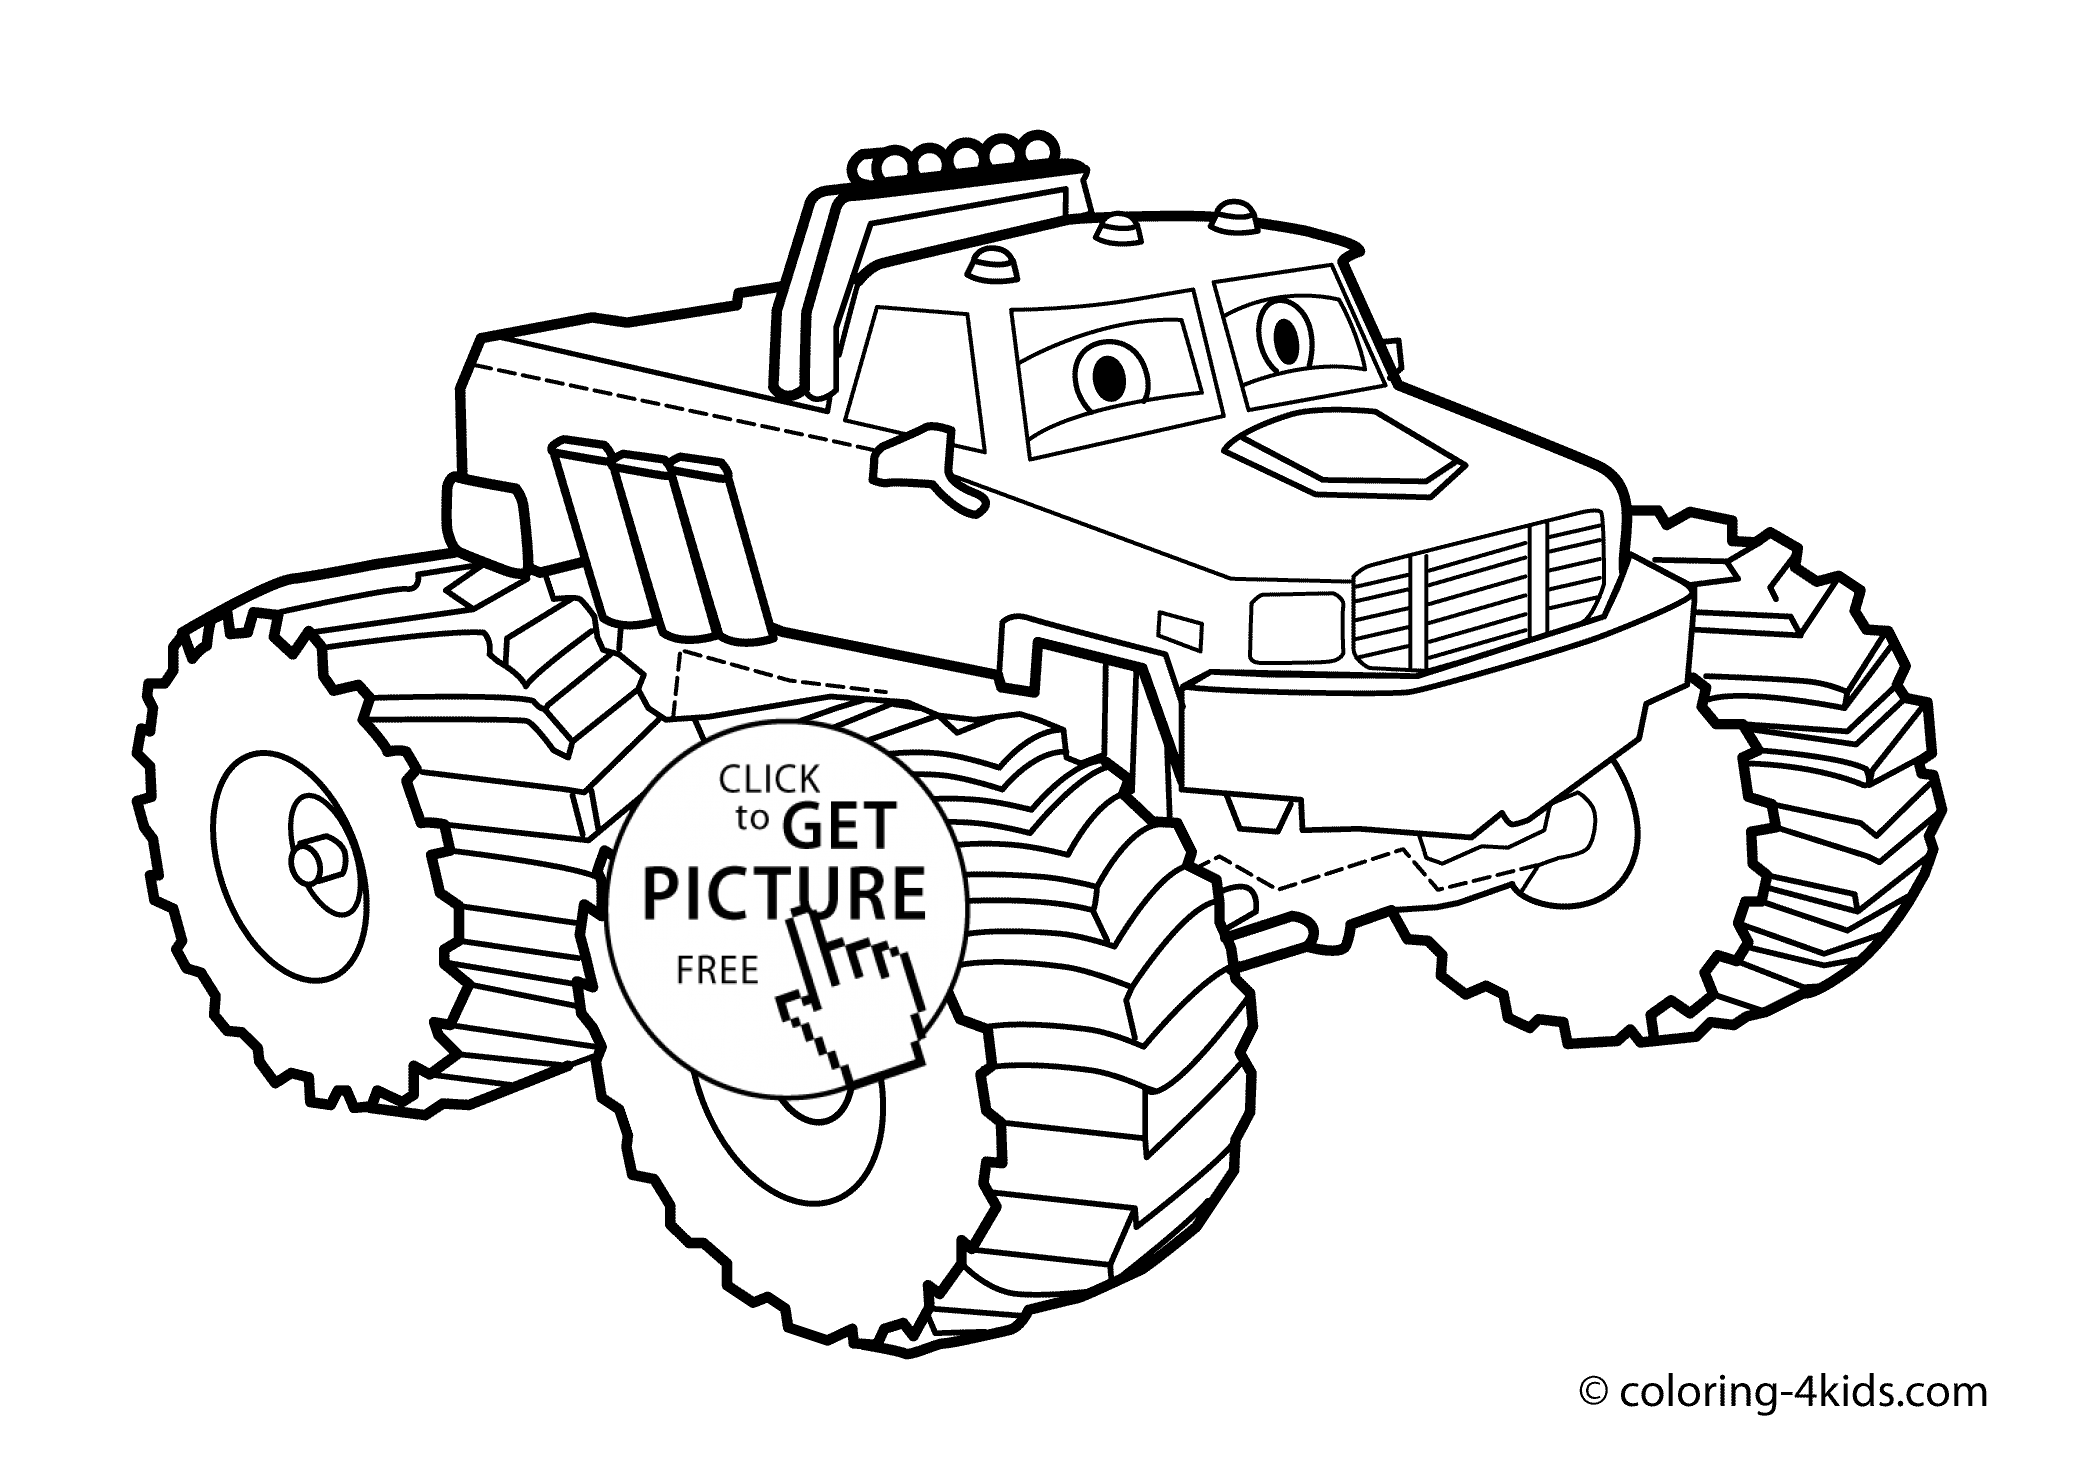 Monster truck Coloring page for kids, monster truck coloring books ...